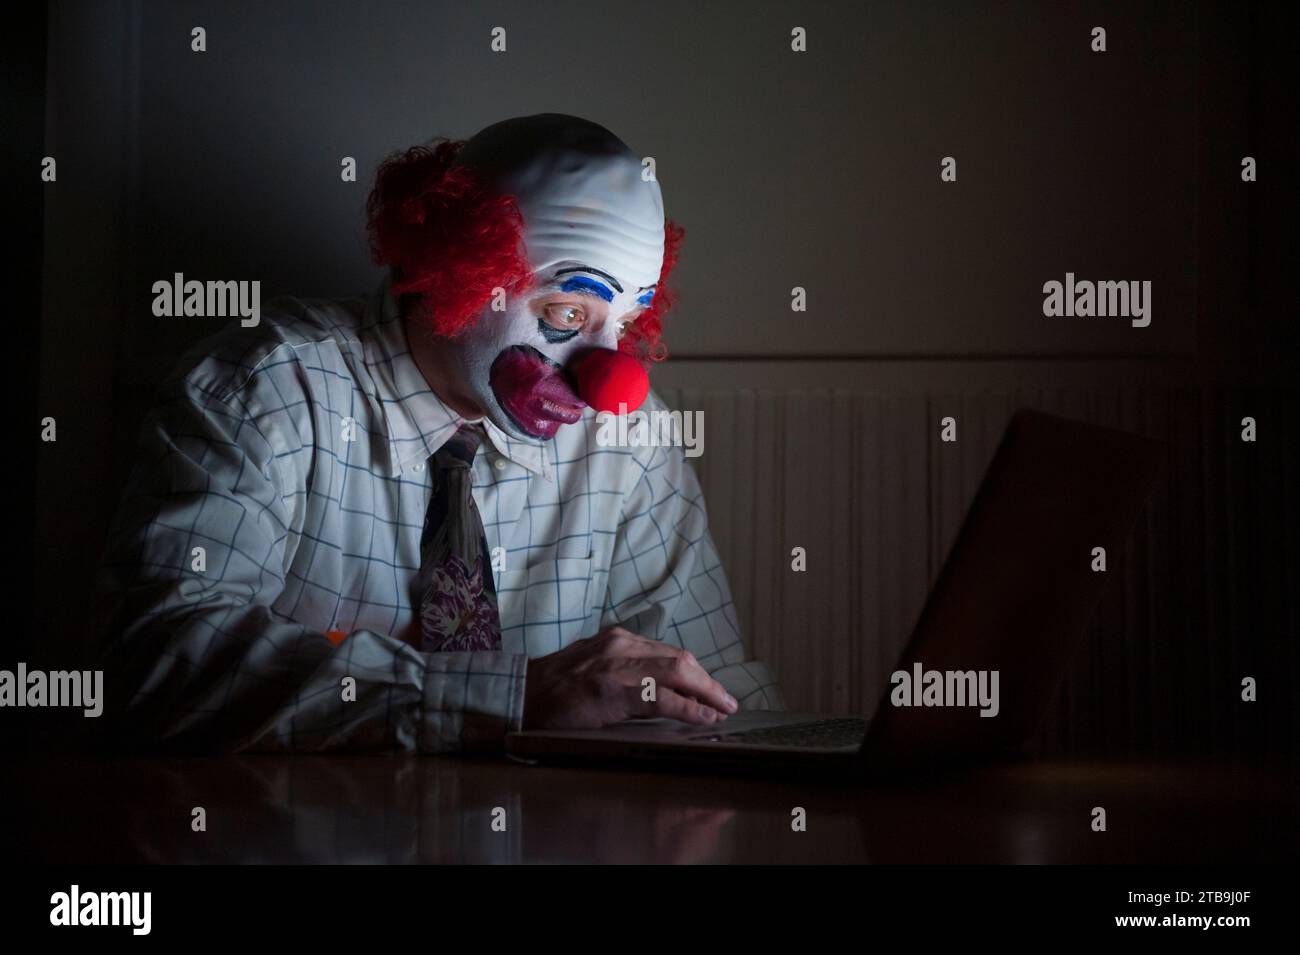 Clown wearing a shirt and tie uses a laptop computer to surf the web, having a wide-eyed look of surprise on his face Stock Photo